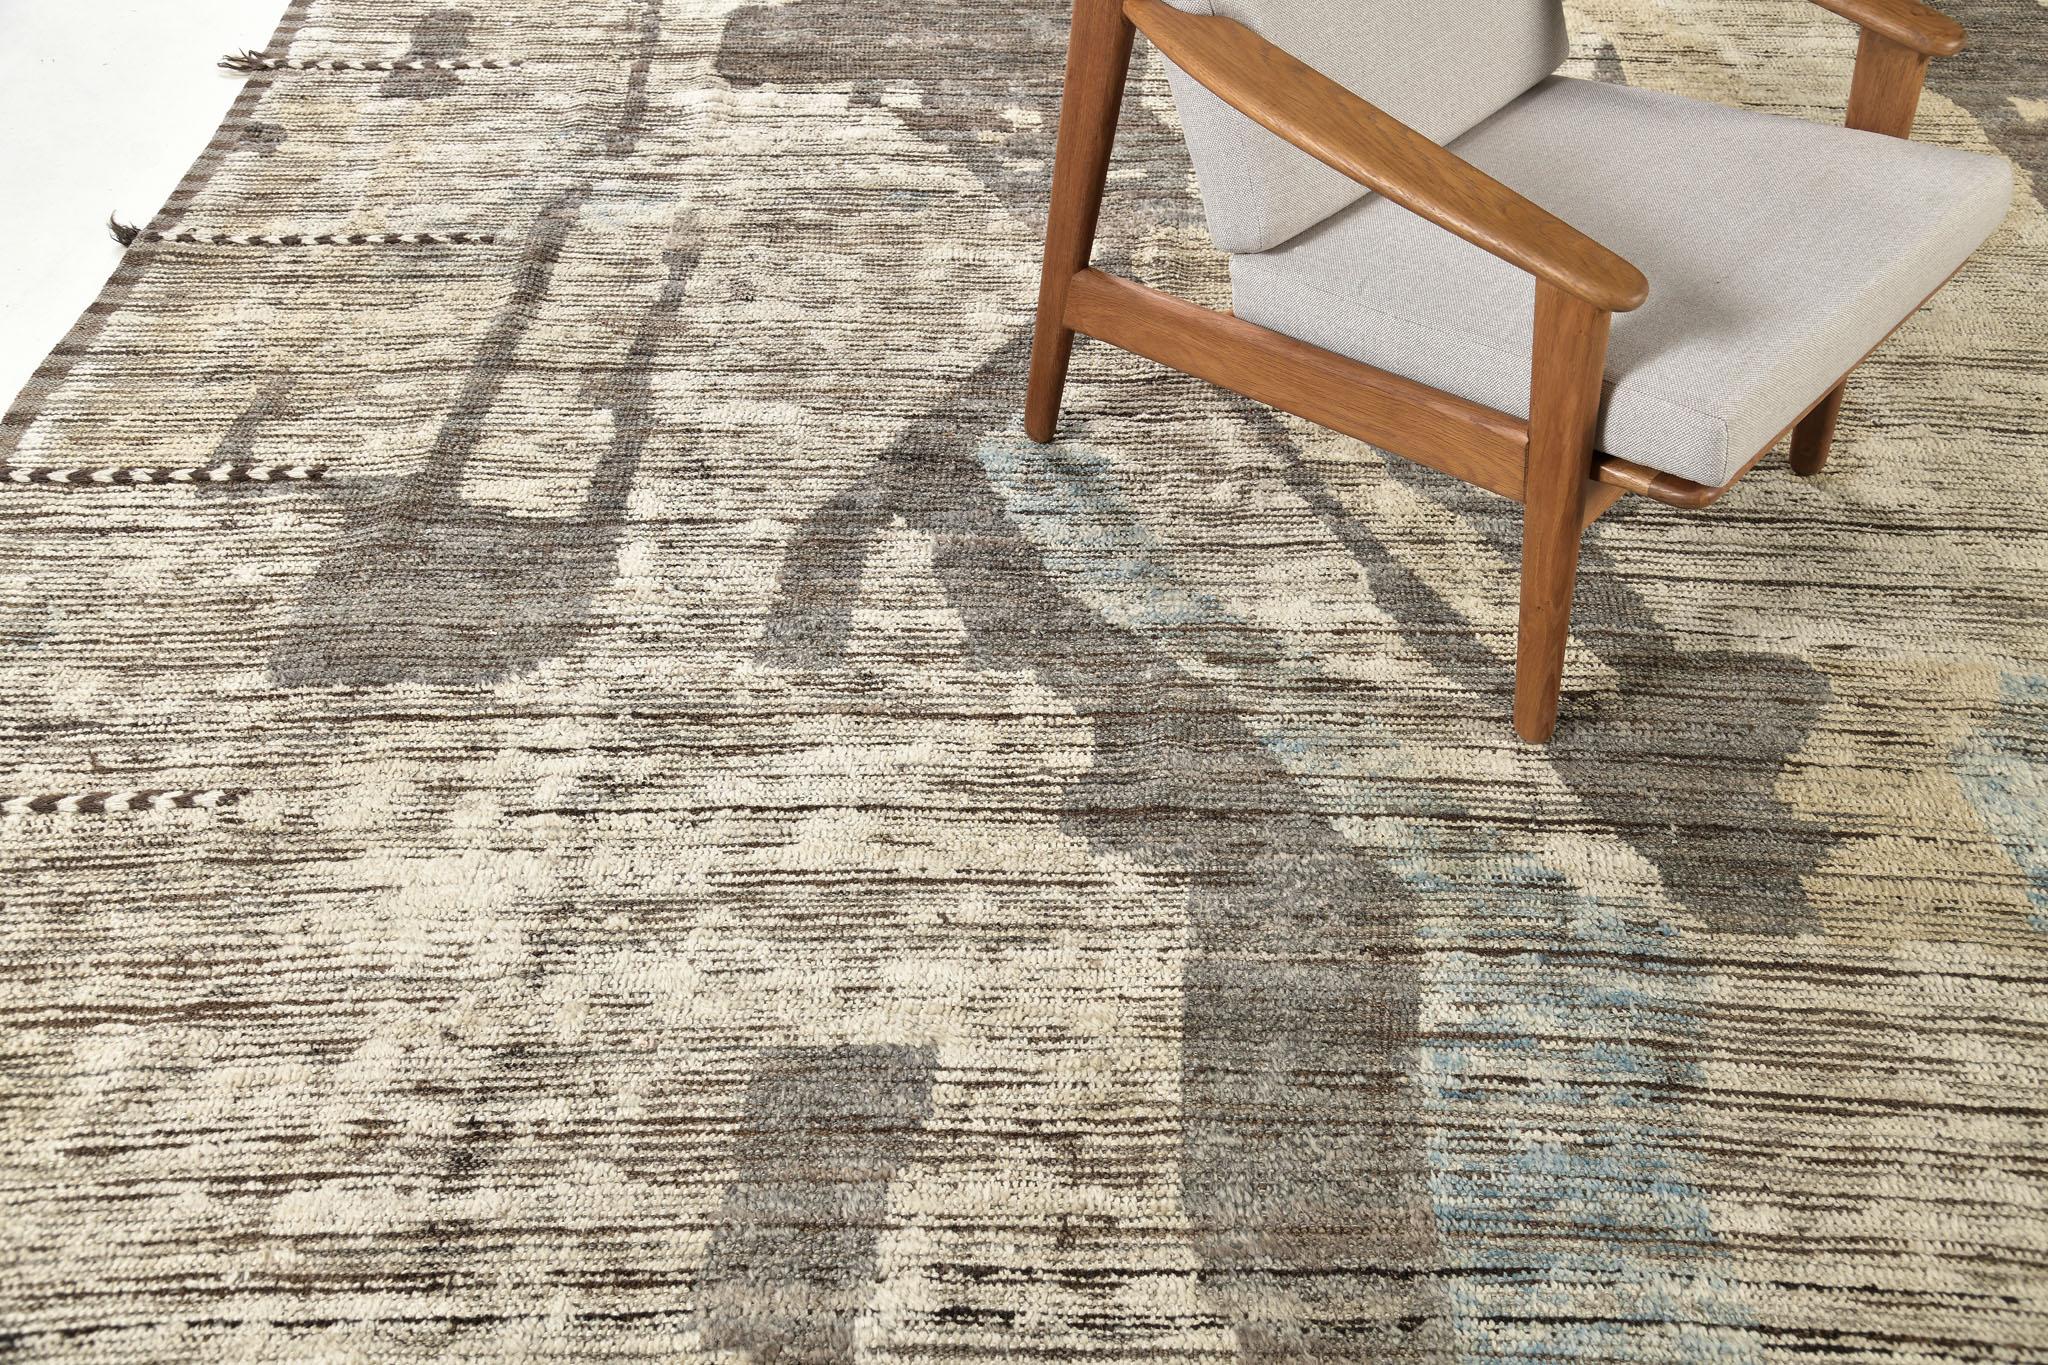 Nakhla is a natural earth-toned rug and a modern interpretation of the Moroccan world. These rugs' irregular patches and linear strokes of cream, blue, and gray resemble the fibers of nature and their ability to be used for crafts such as cords and